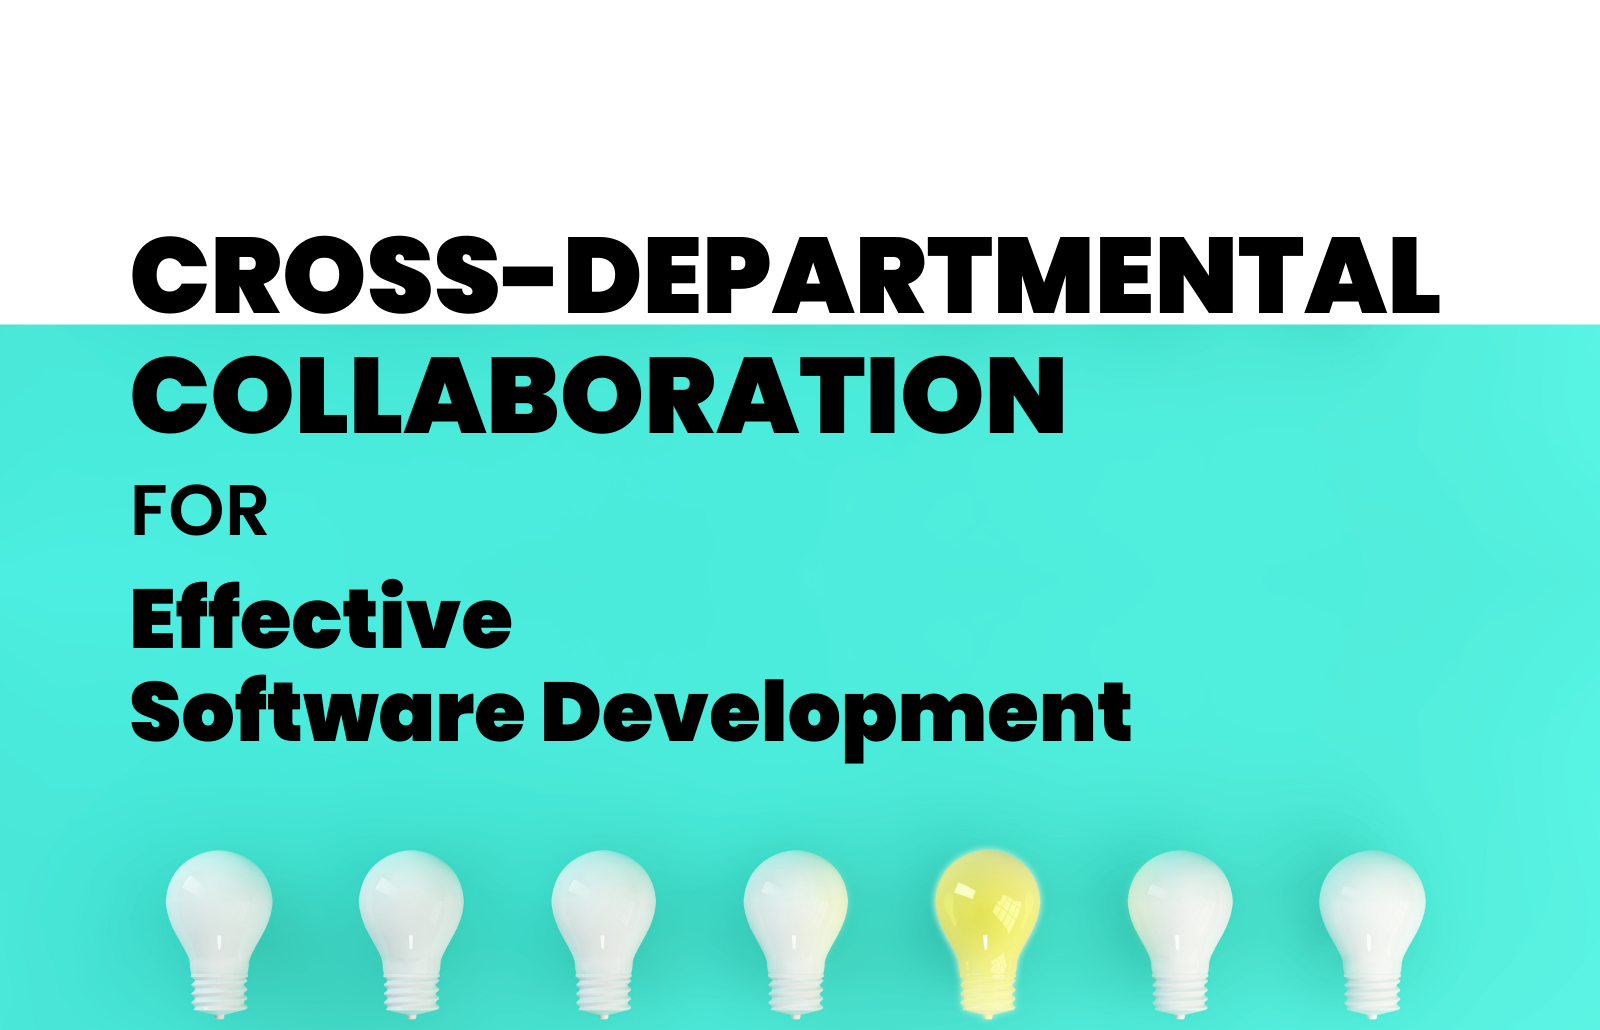 corss functional collaboration in software teams